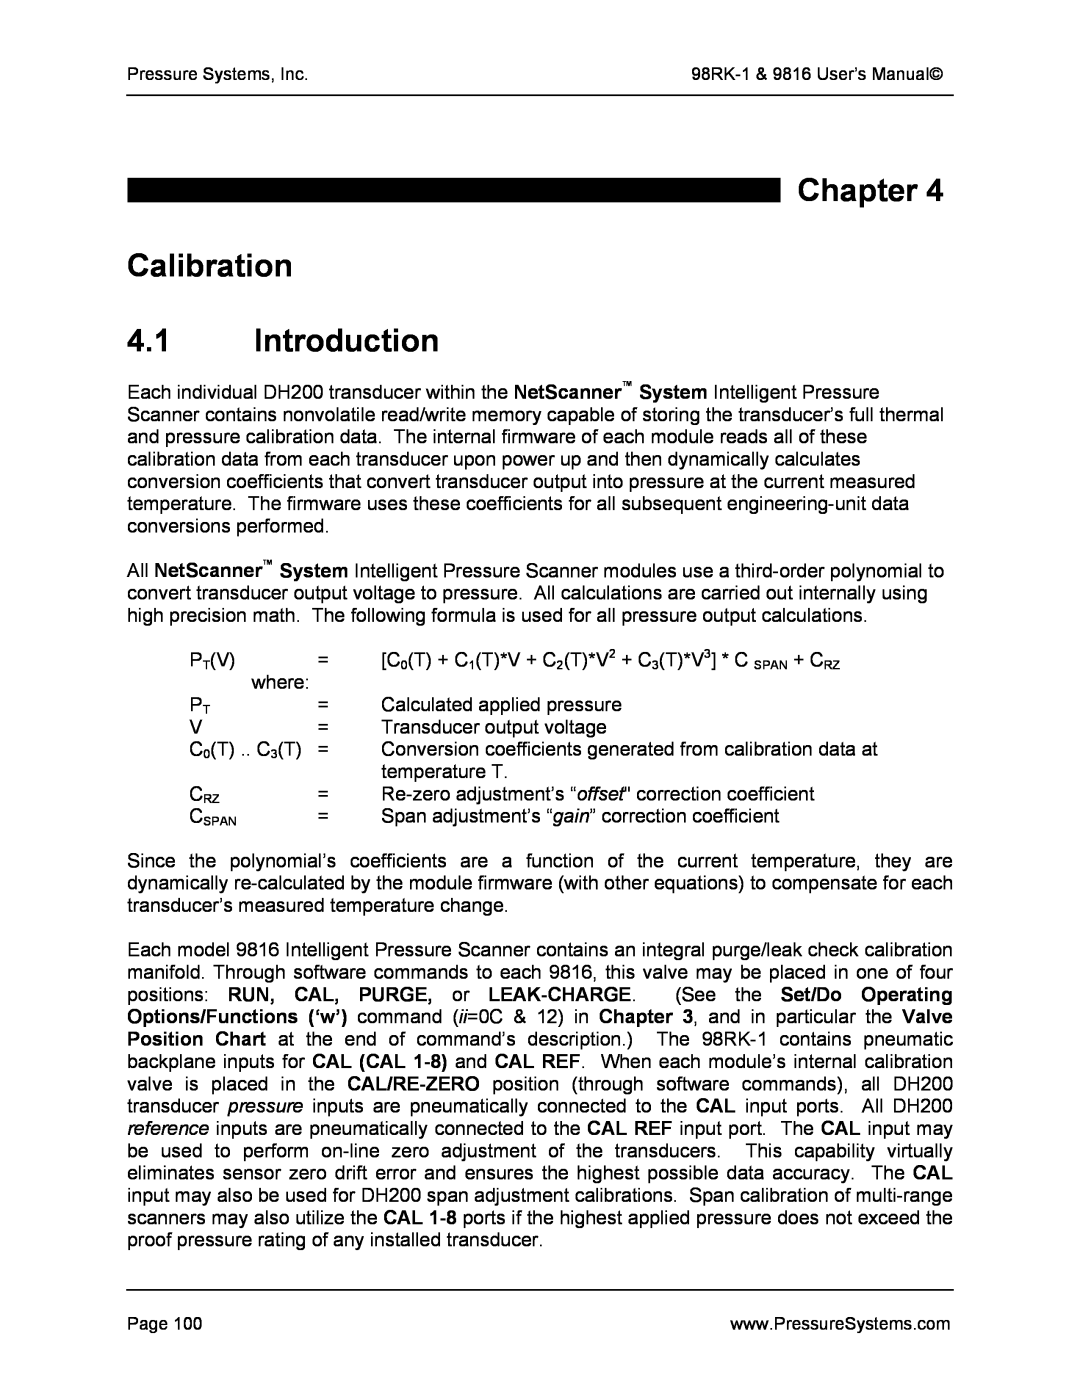 Pressure Systems 98RK-1 user manual Chapter Calibration 4.1 Introduction, Cspan 